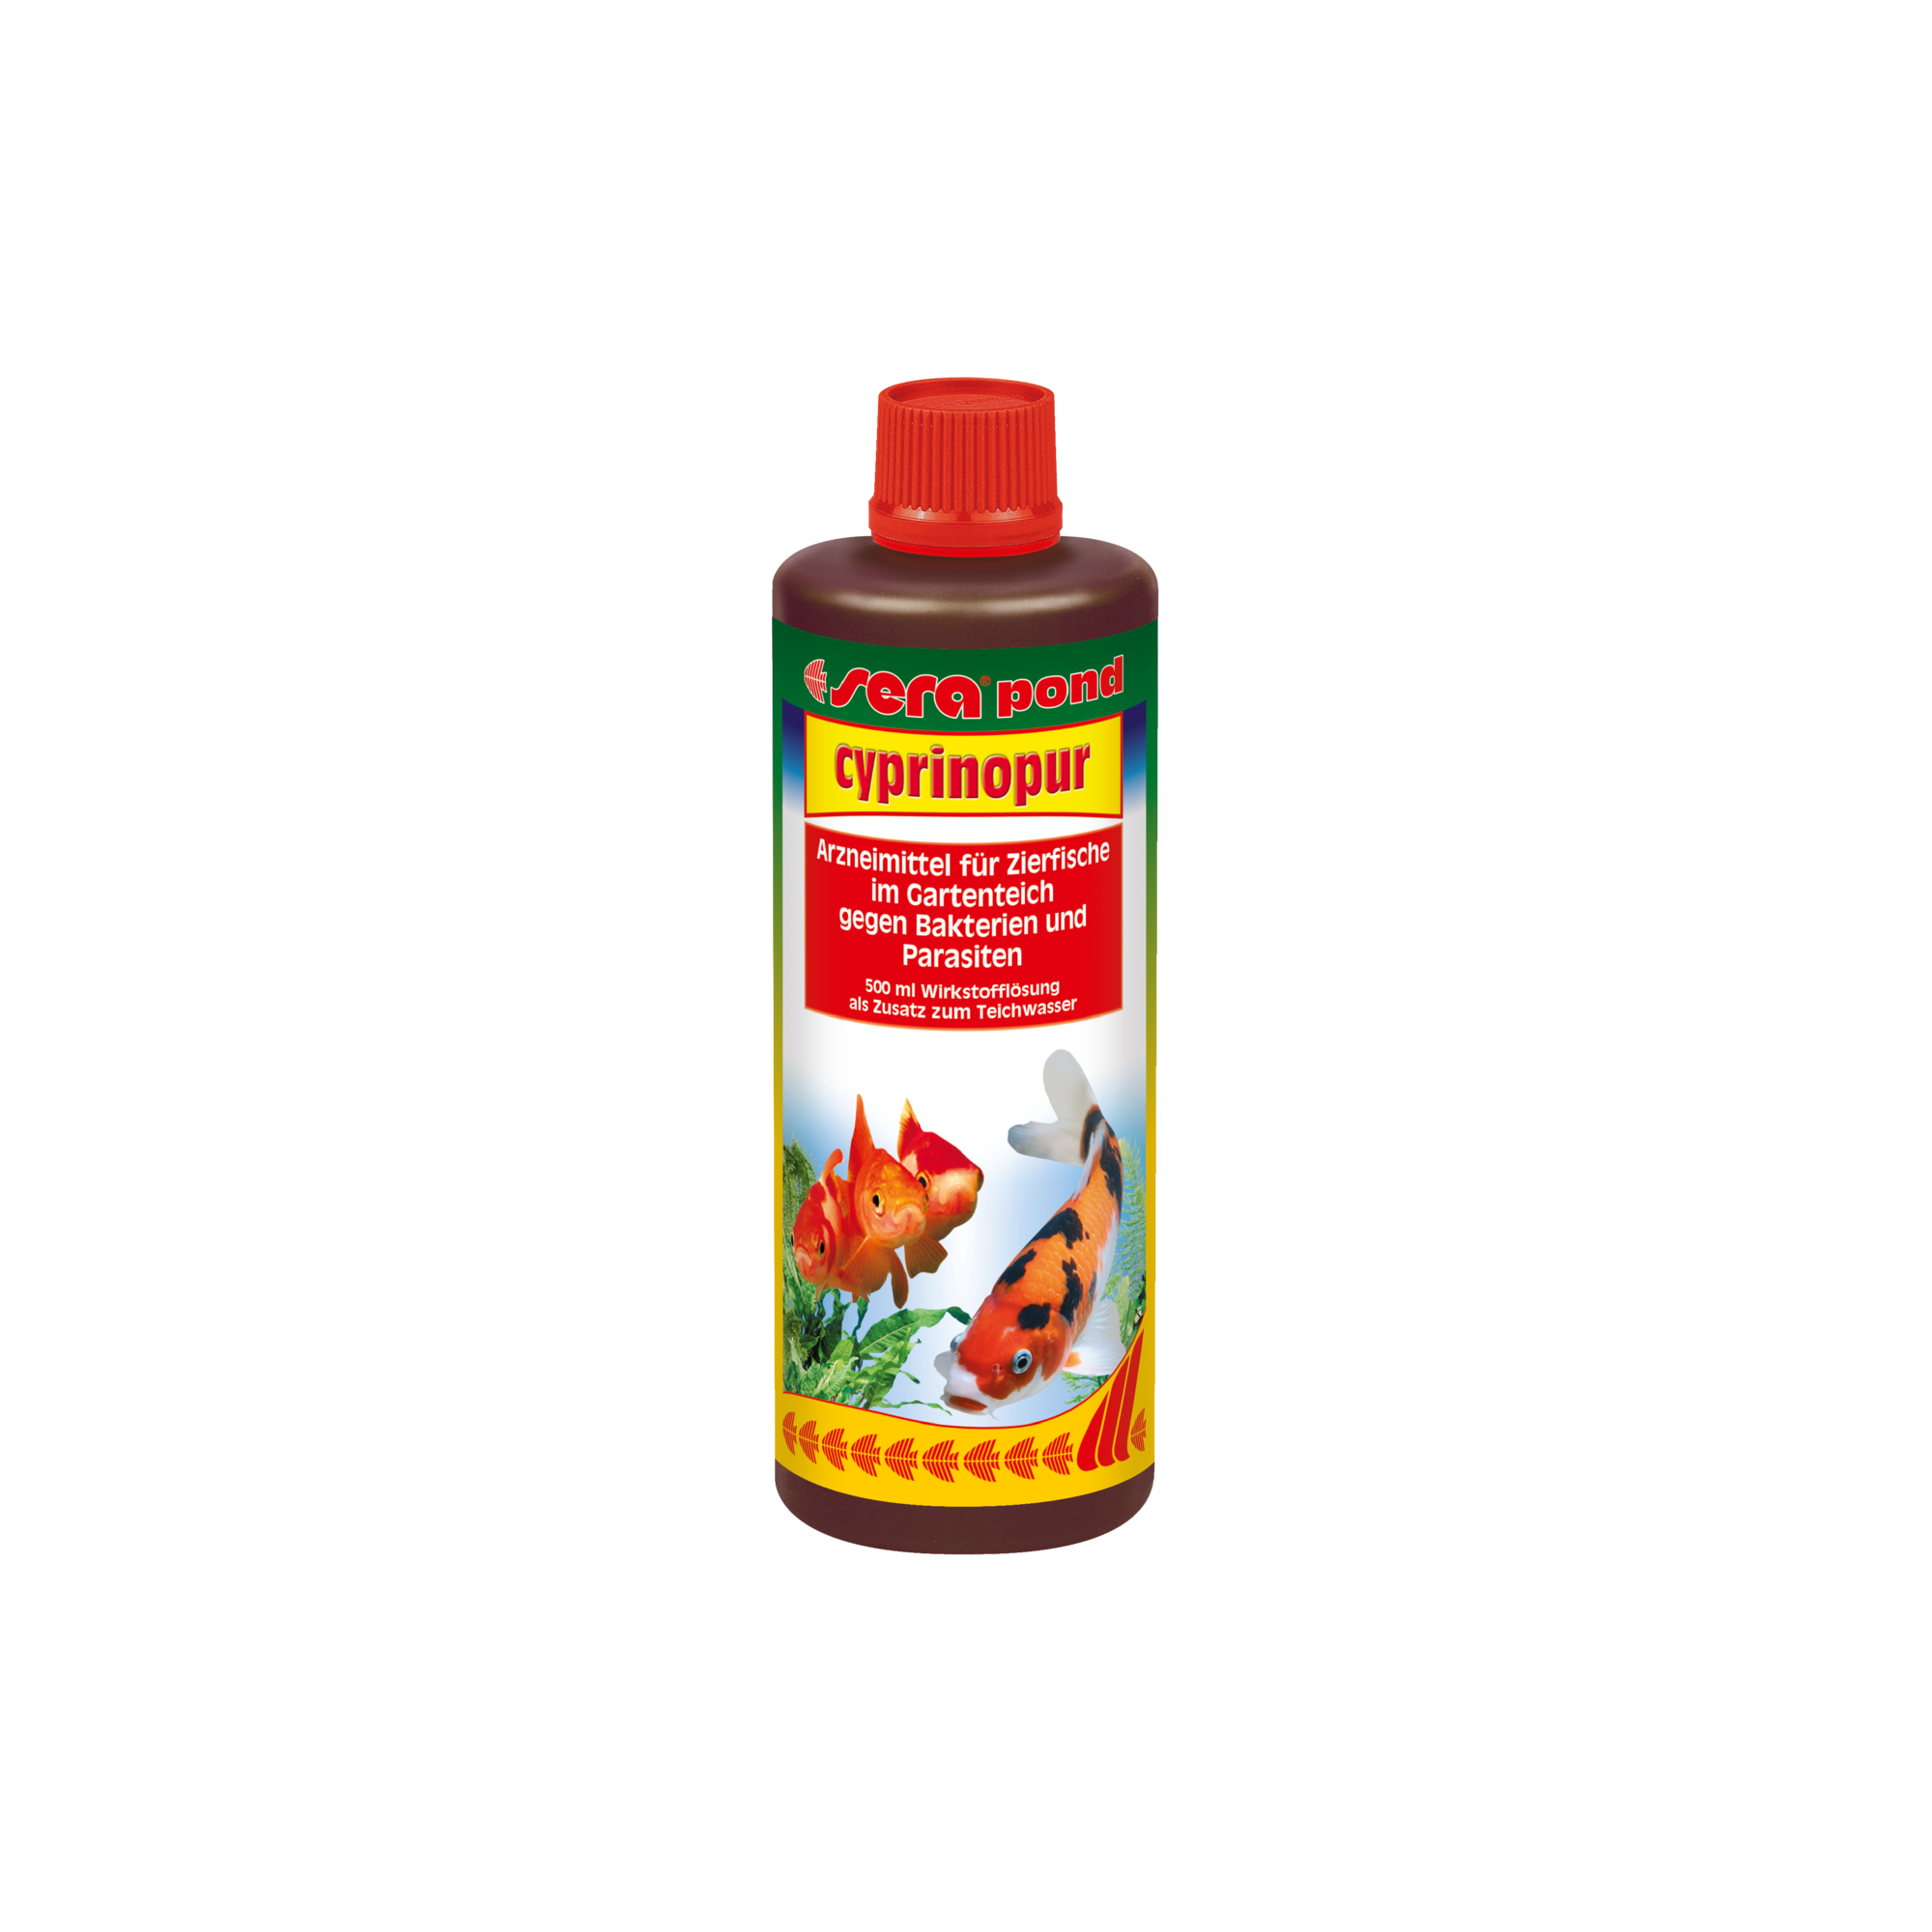 pond cyprinopur 500 ml + product picture